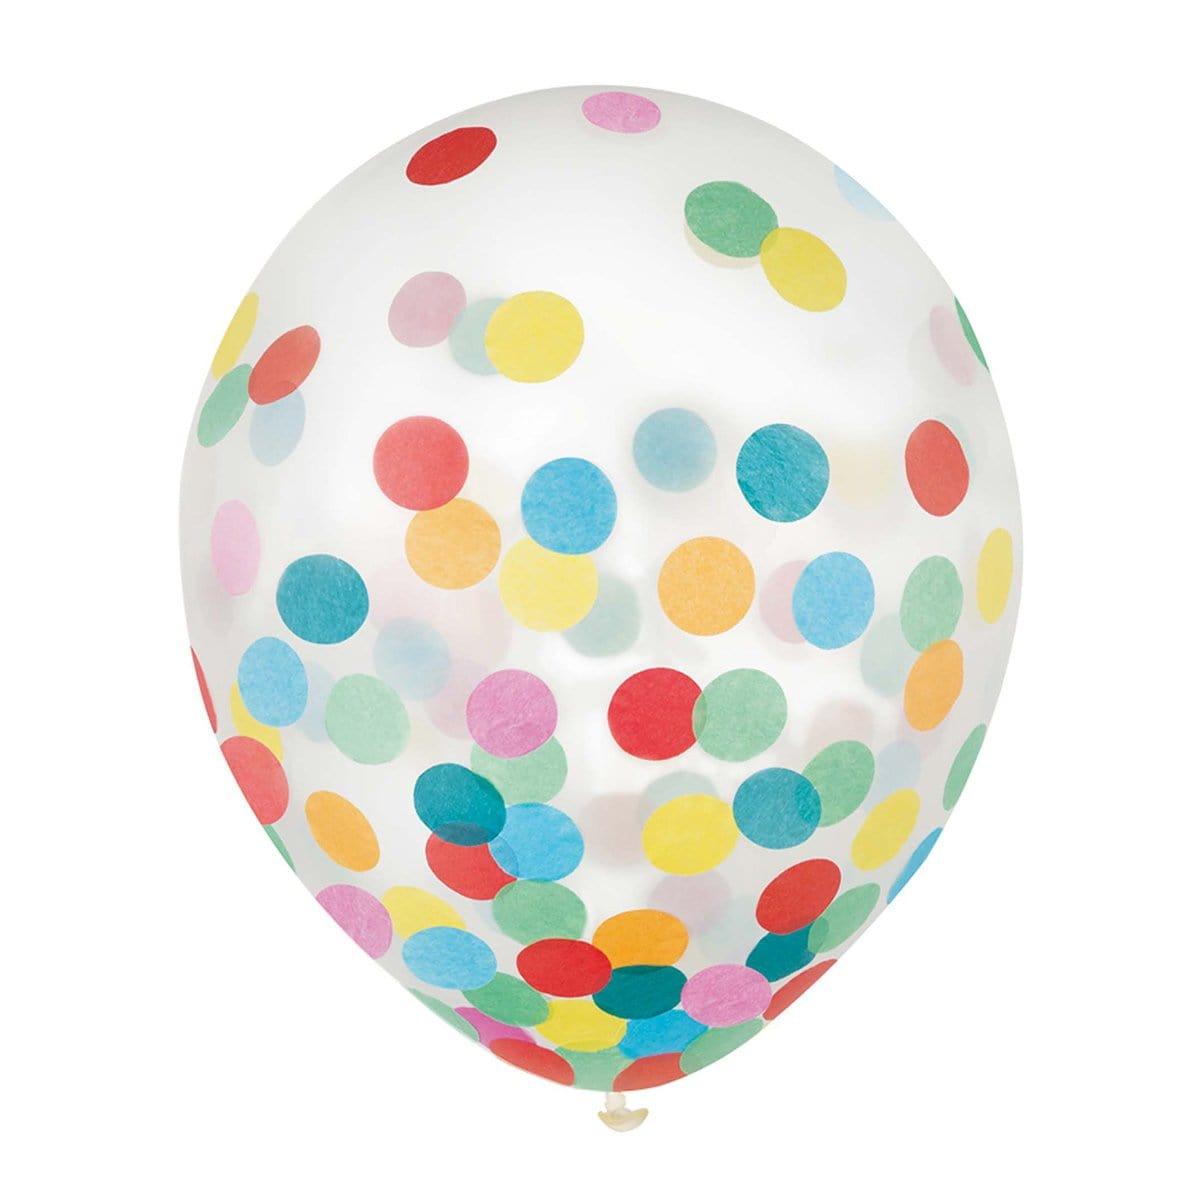 Buy Balloons Latex Balloons With Multicolor Confetti, 12 Inches, 6 Count sold at Party Expert